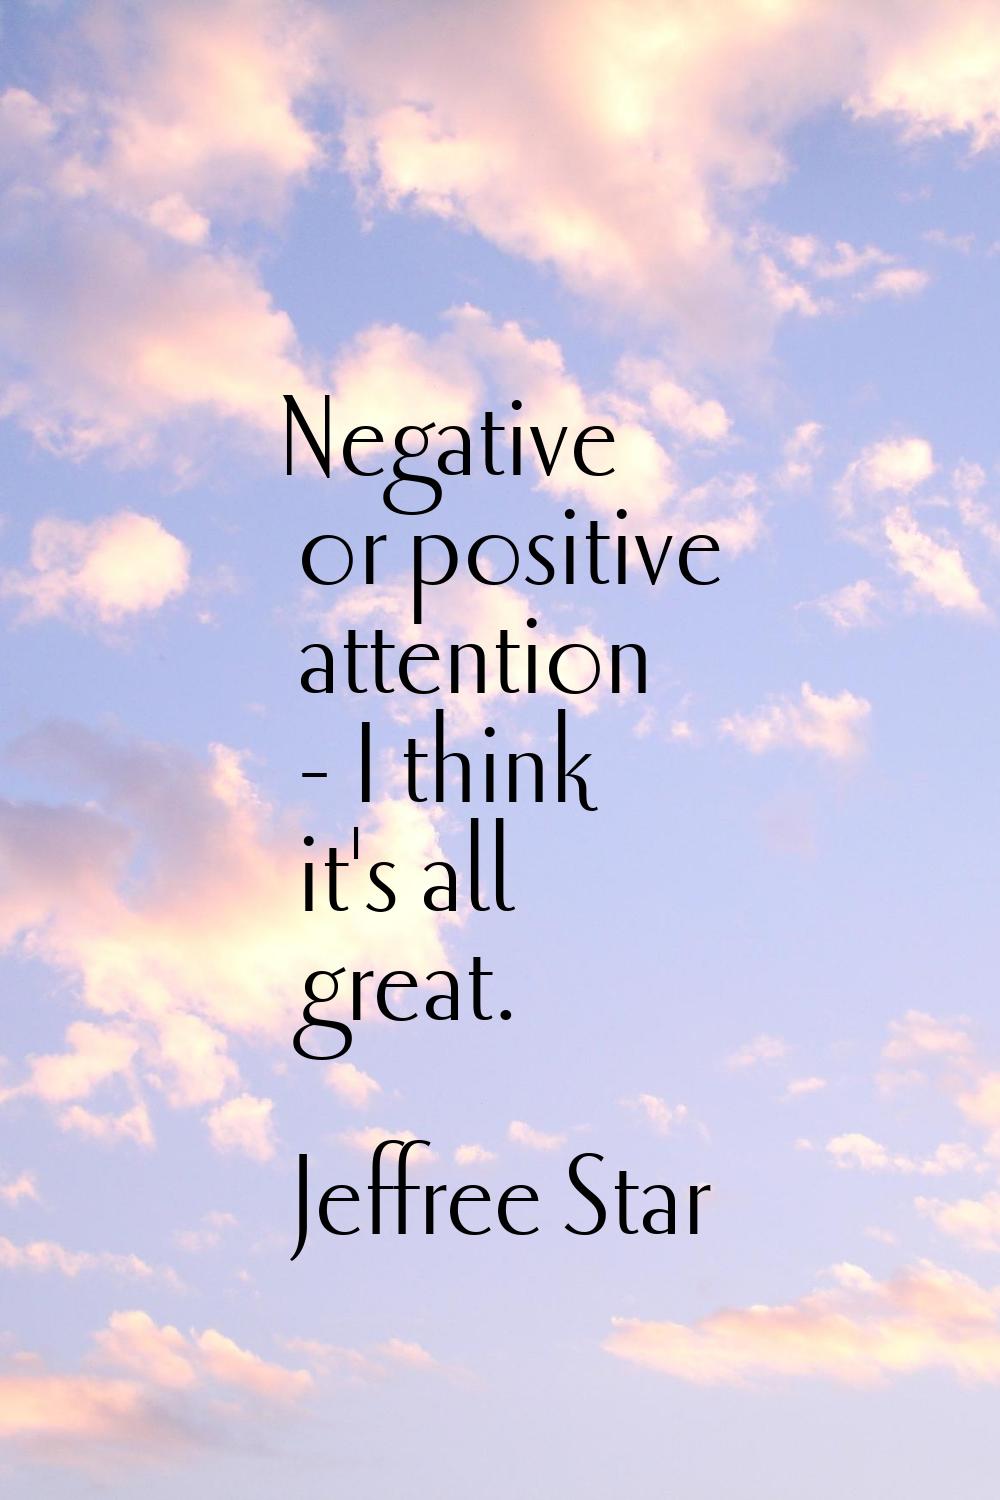 Negative or positive attention - I think it's all great.